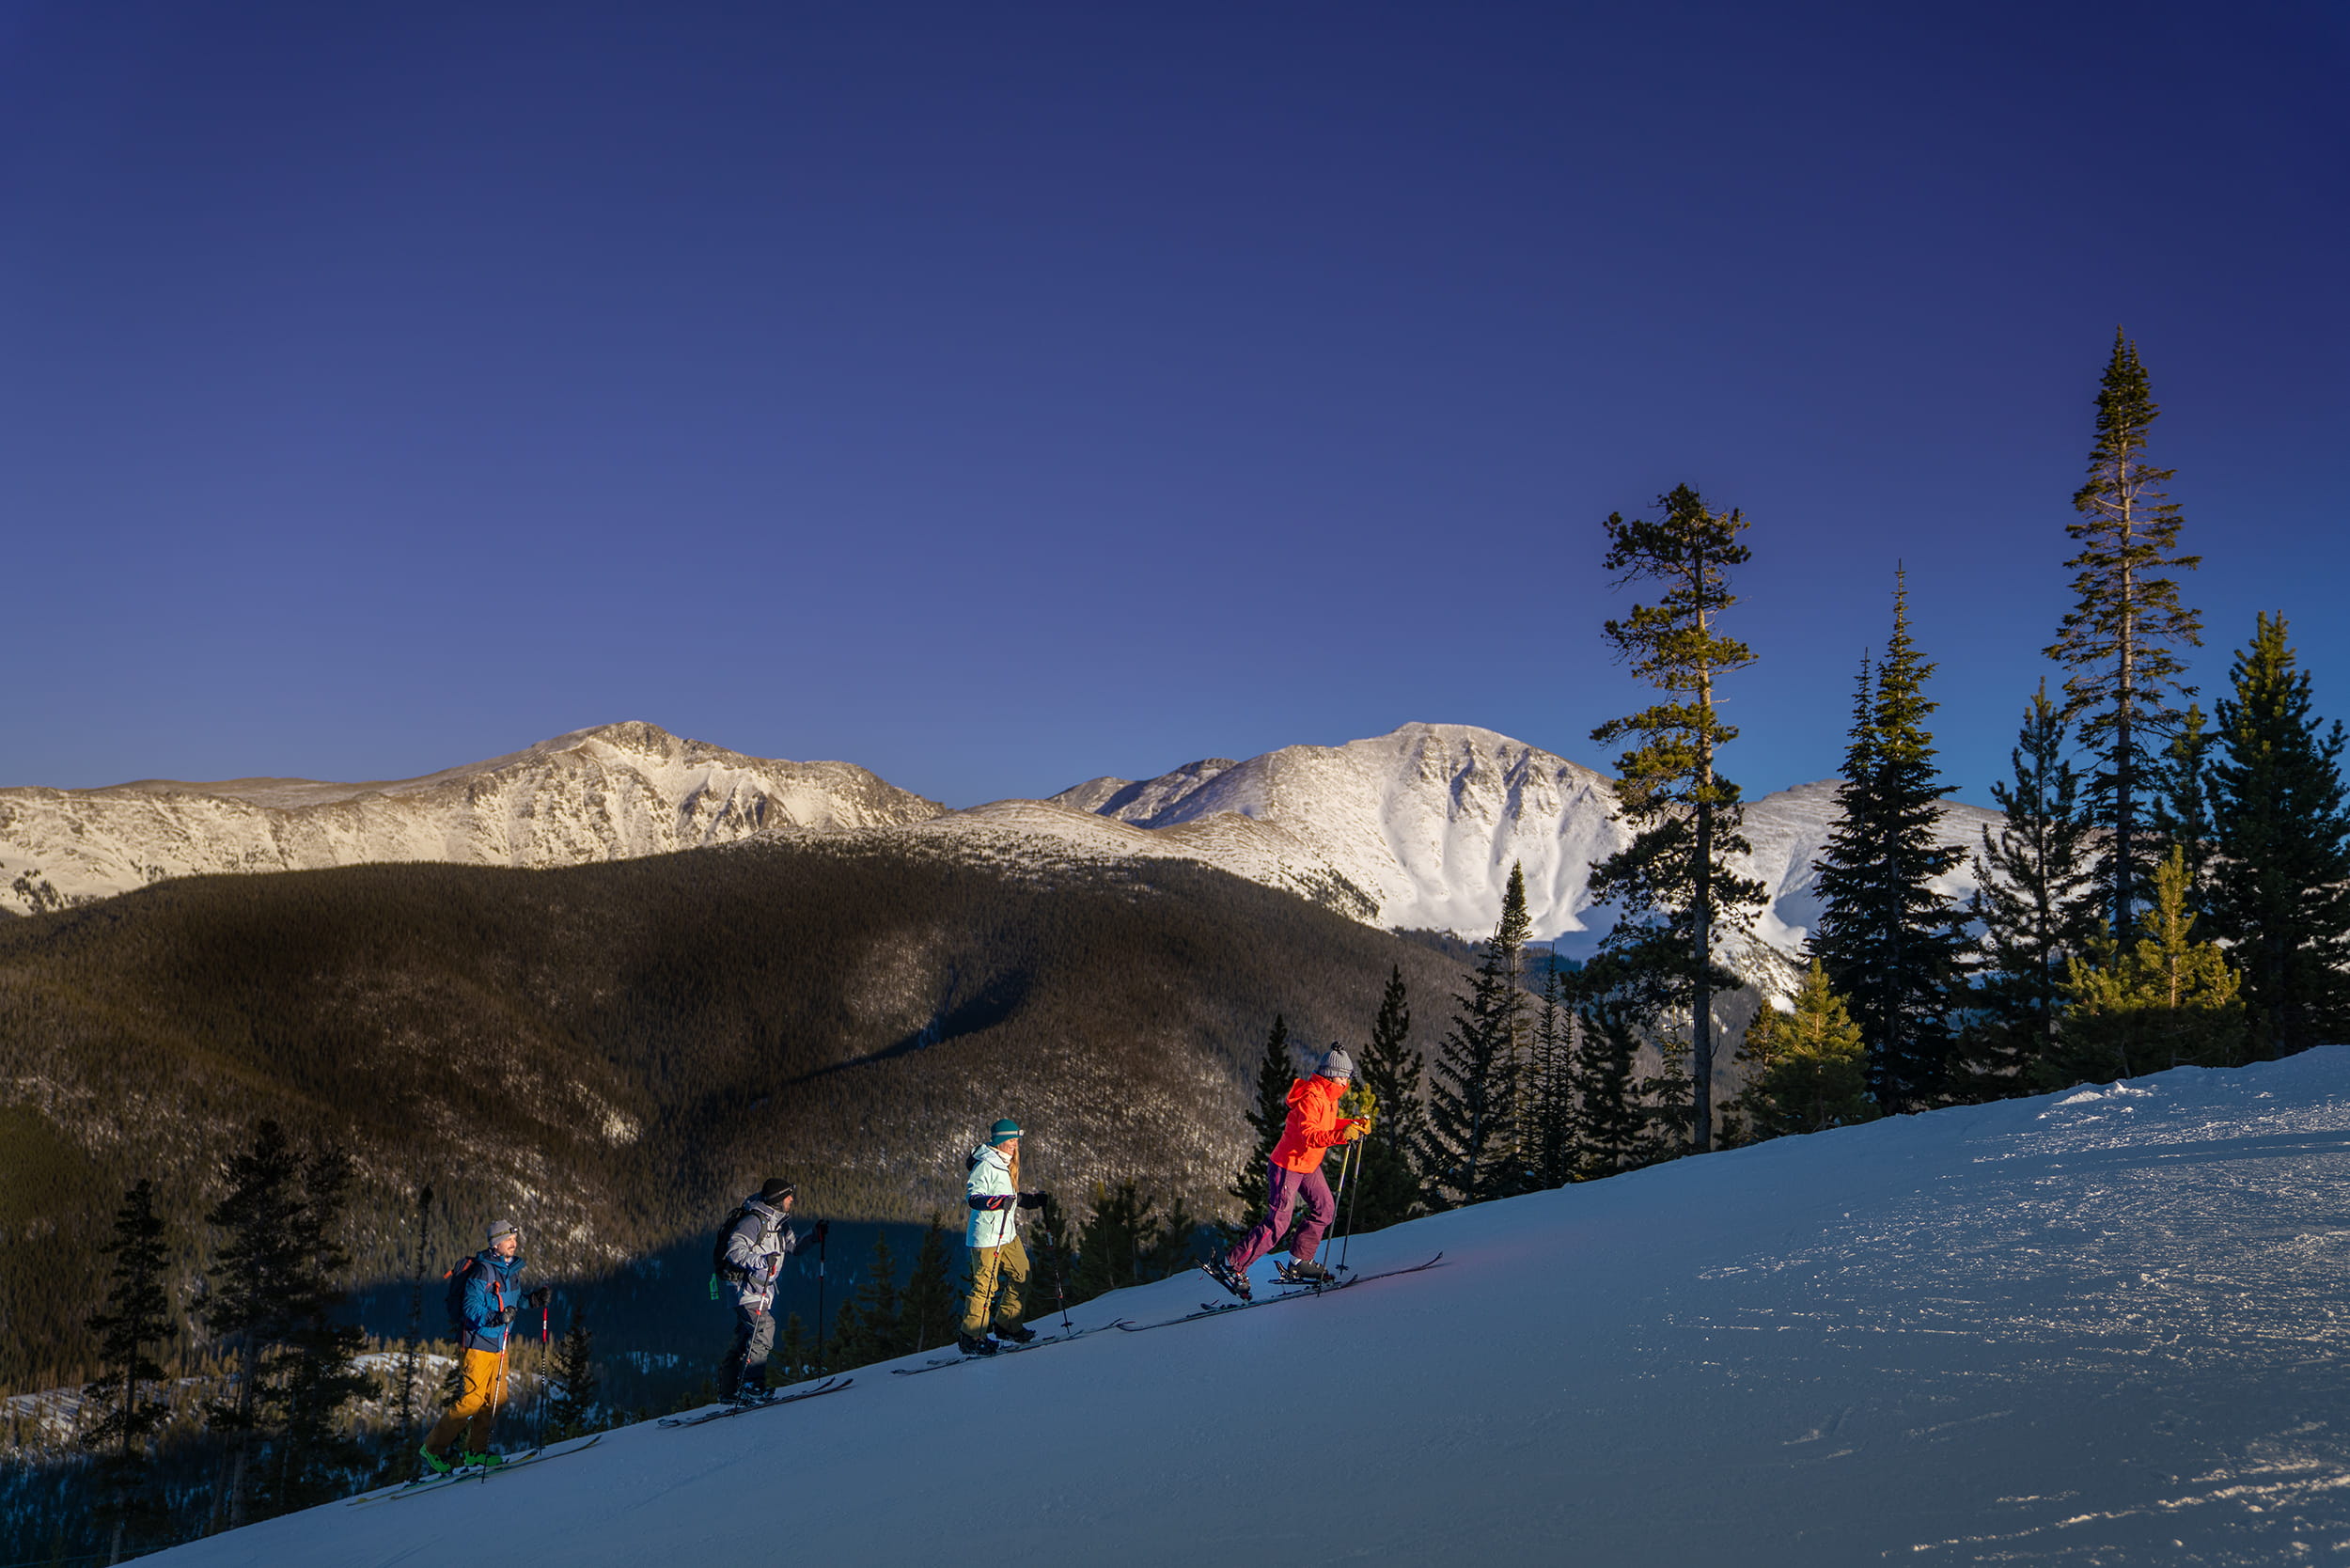 A group of 4 people touring at winter park